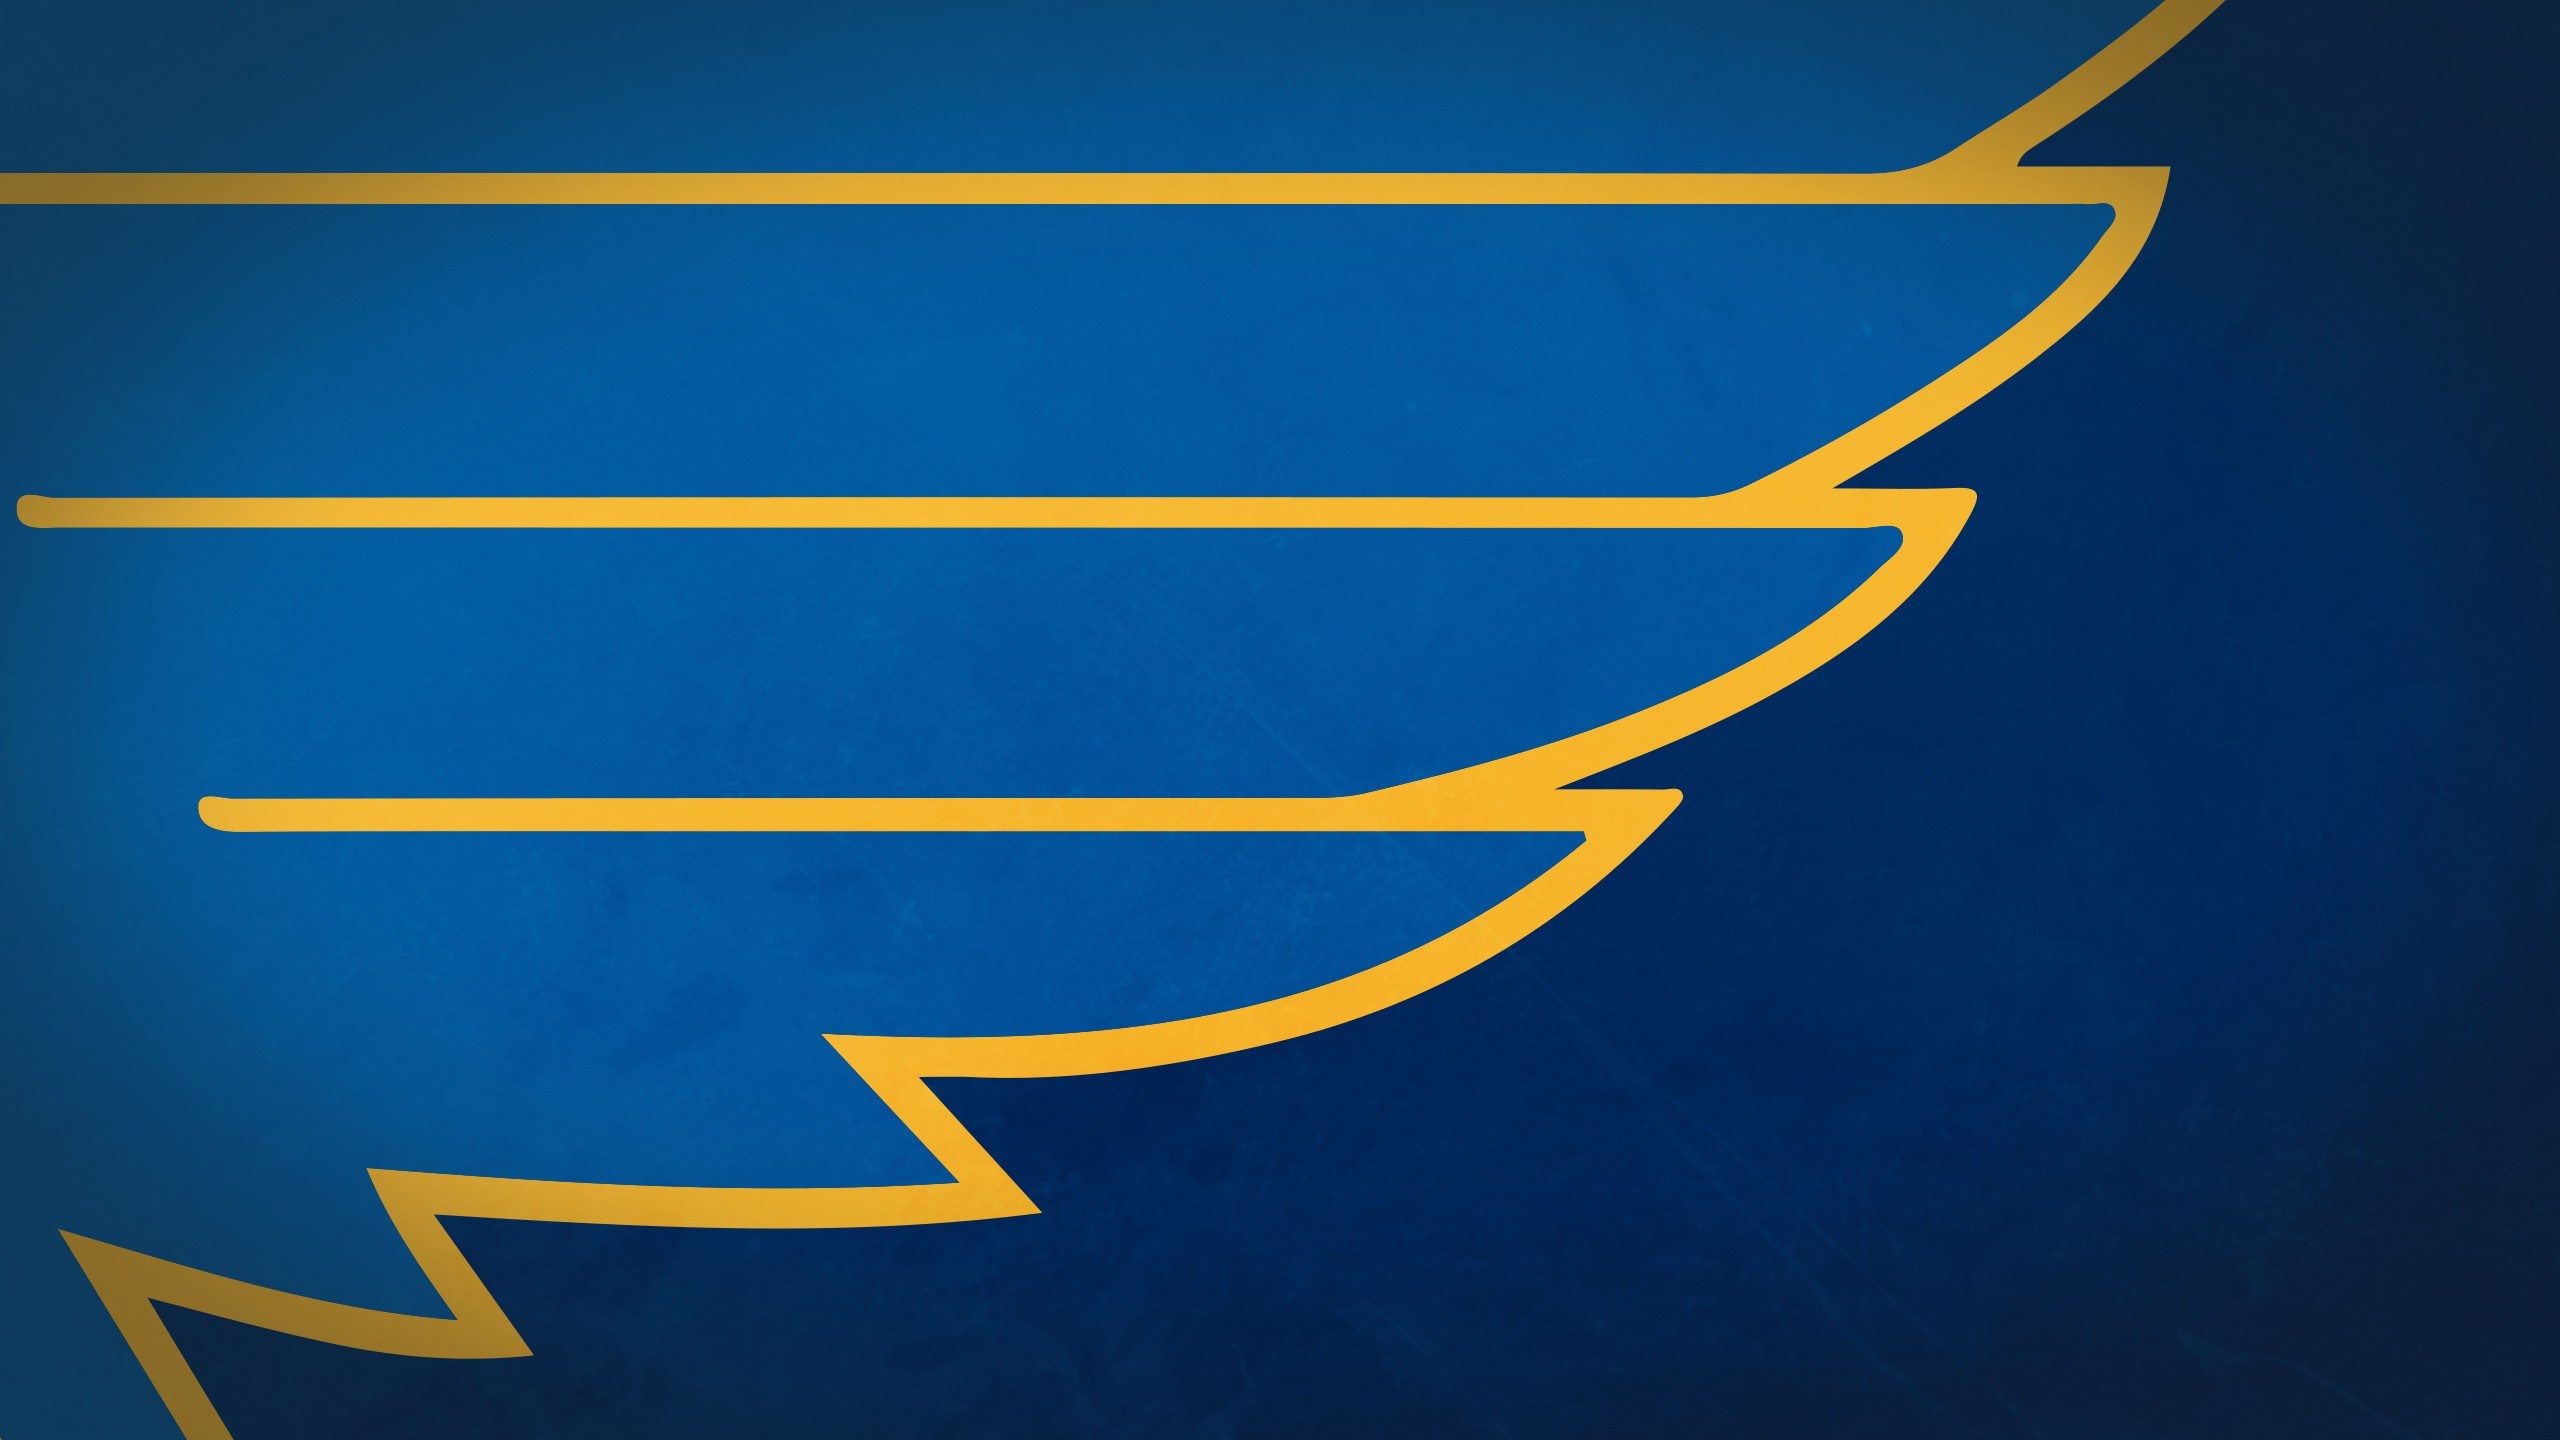 Download wallpapers St Louis Blues, hockey, National Hockey League, NHL,  emblem, logo, St Louis, Missouri, USA, Central Division for desktop free.  Pictures for …